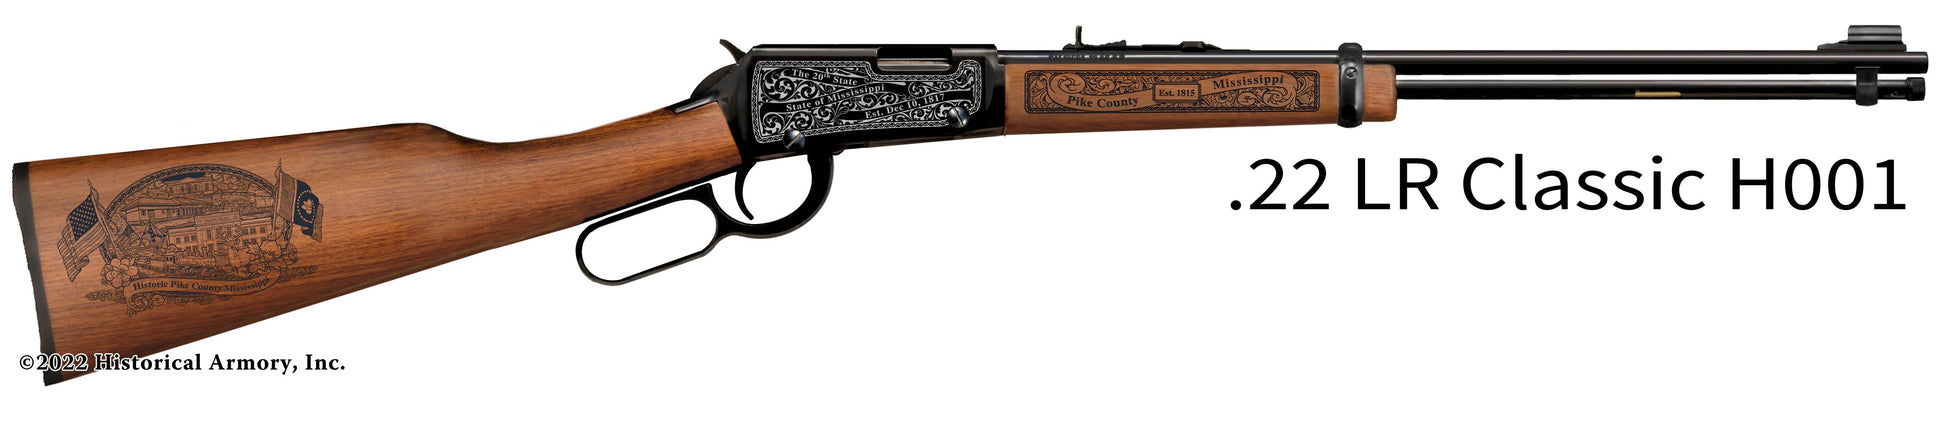 Pike County Mississippi Engraved Henry H001 Rifle